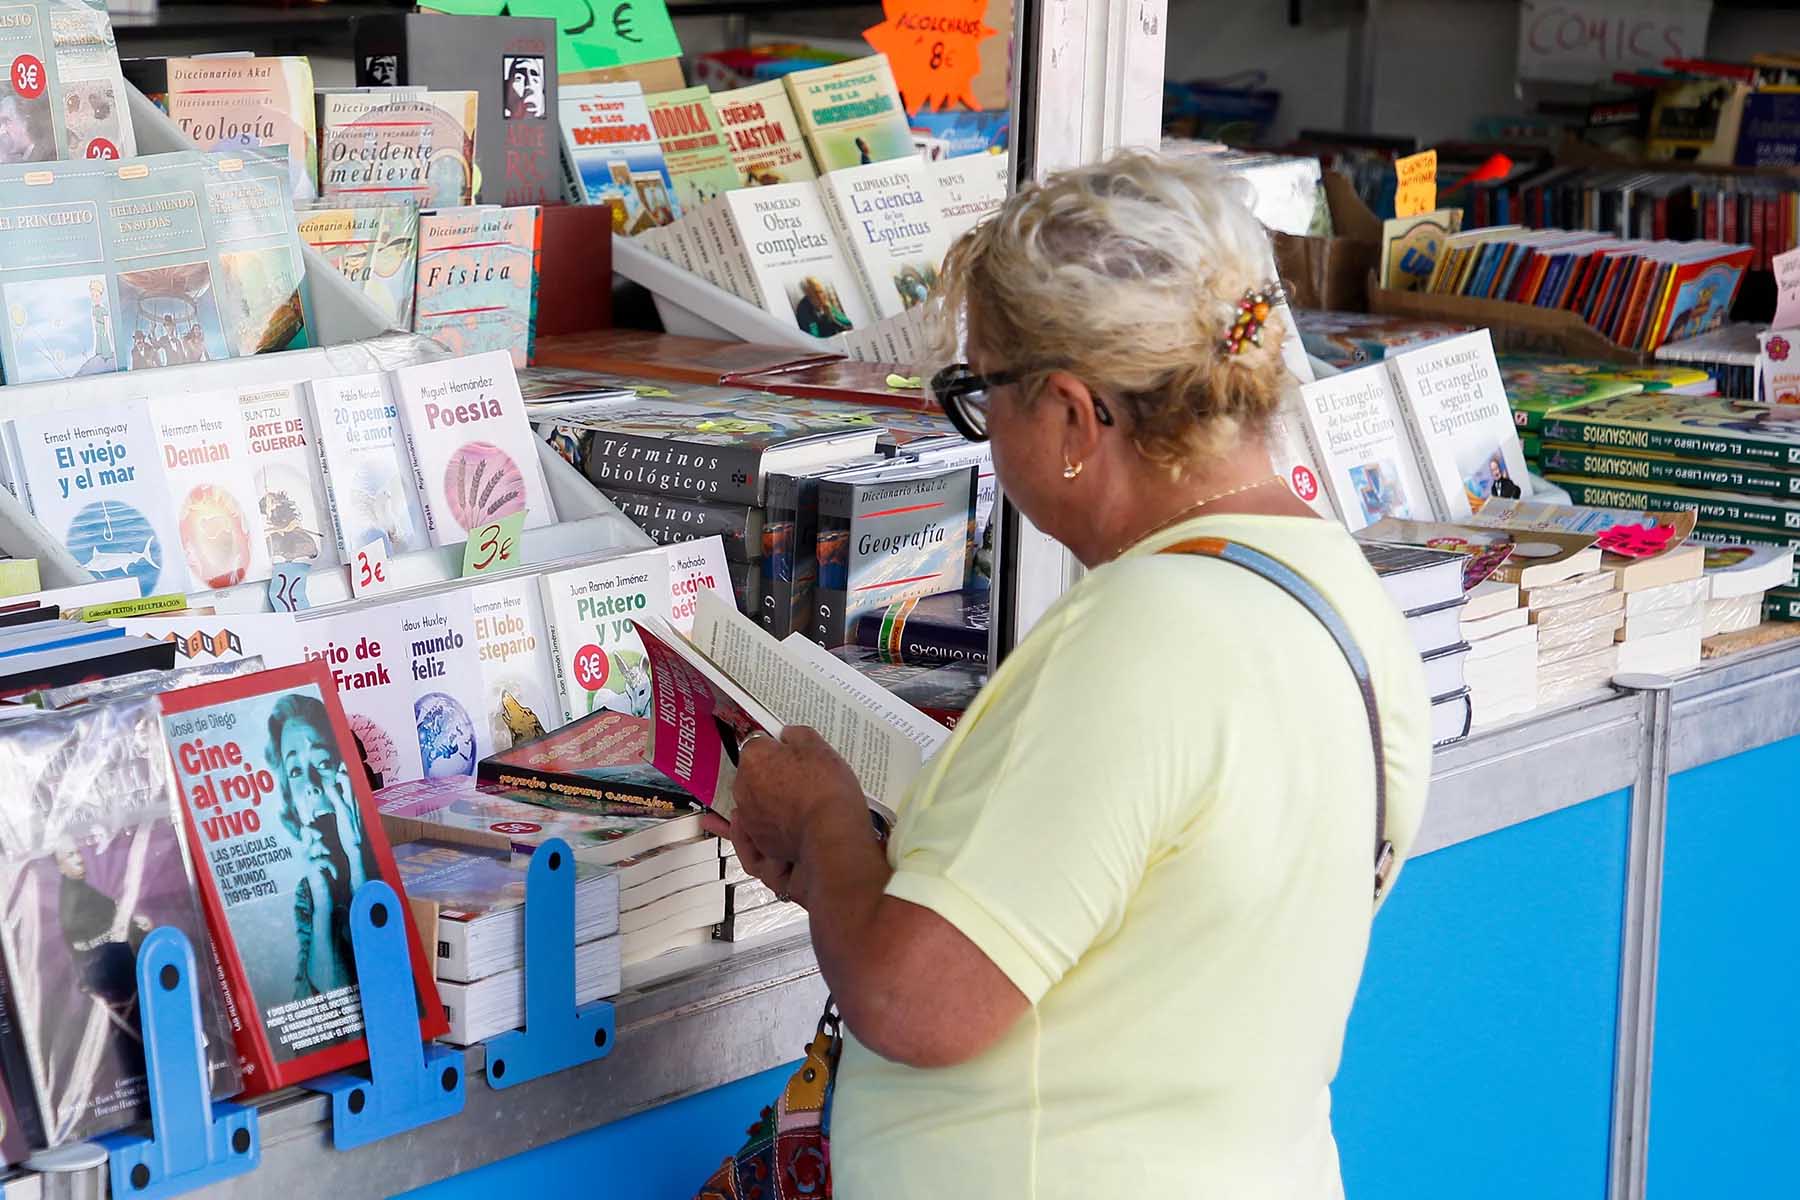 Lady browsing a Spanish language book at a stand.